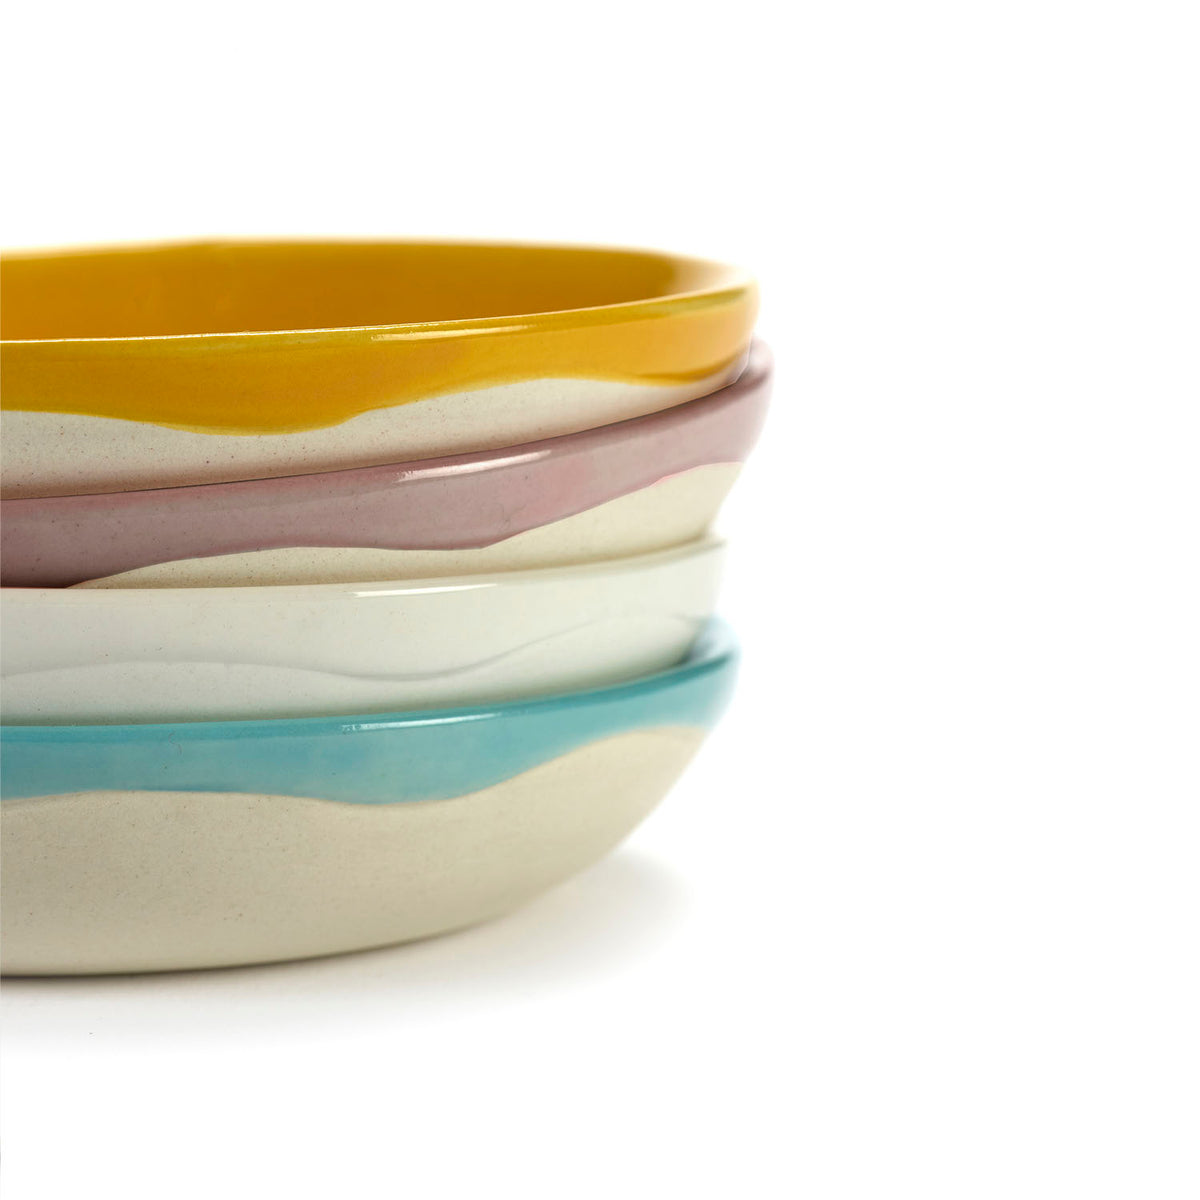 Ottolenghi for Serax Feast collection, side view of small dishes stacked, with four of the five coloured designs.